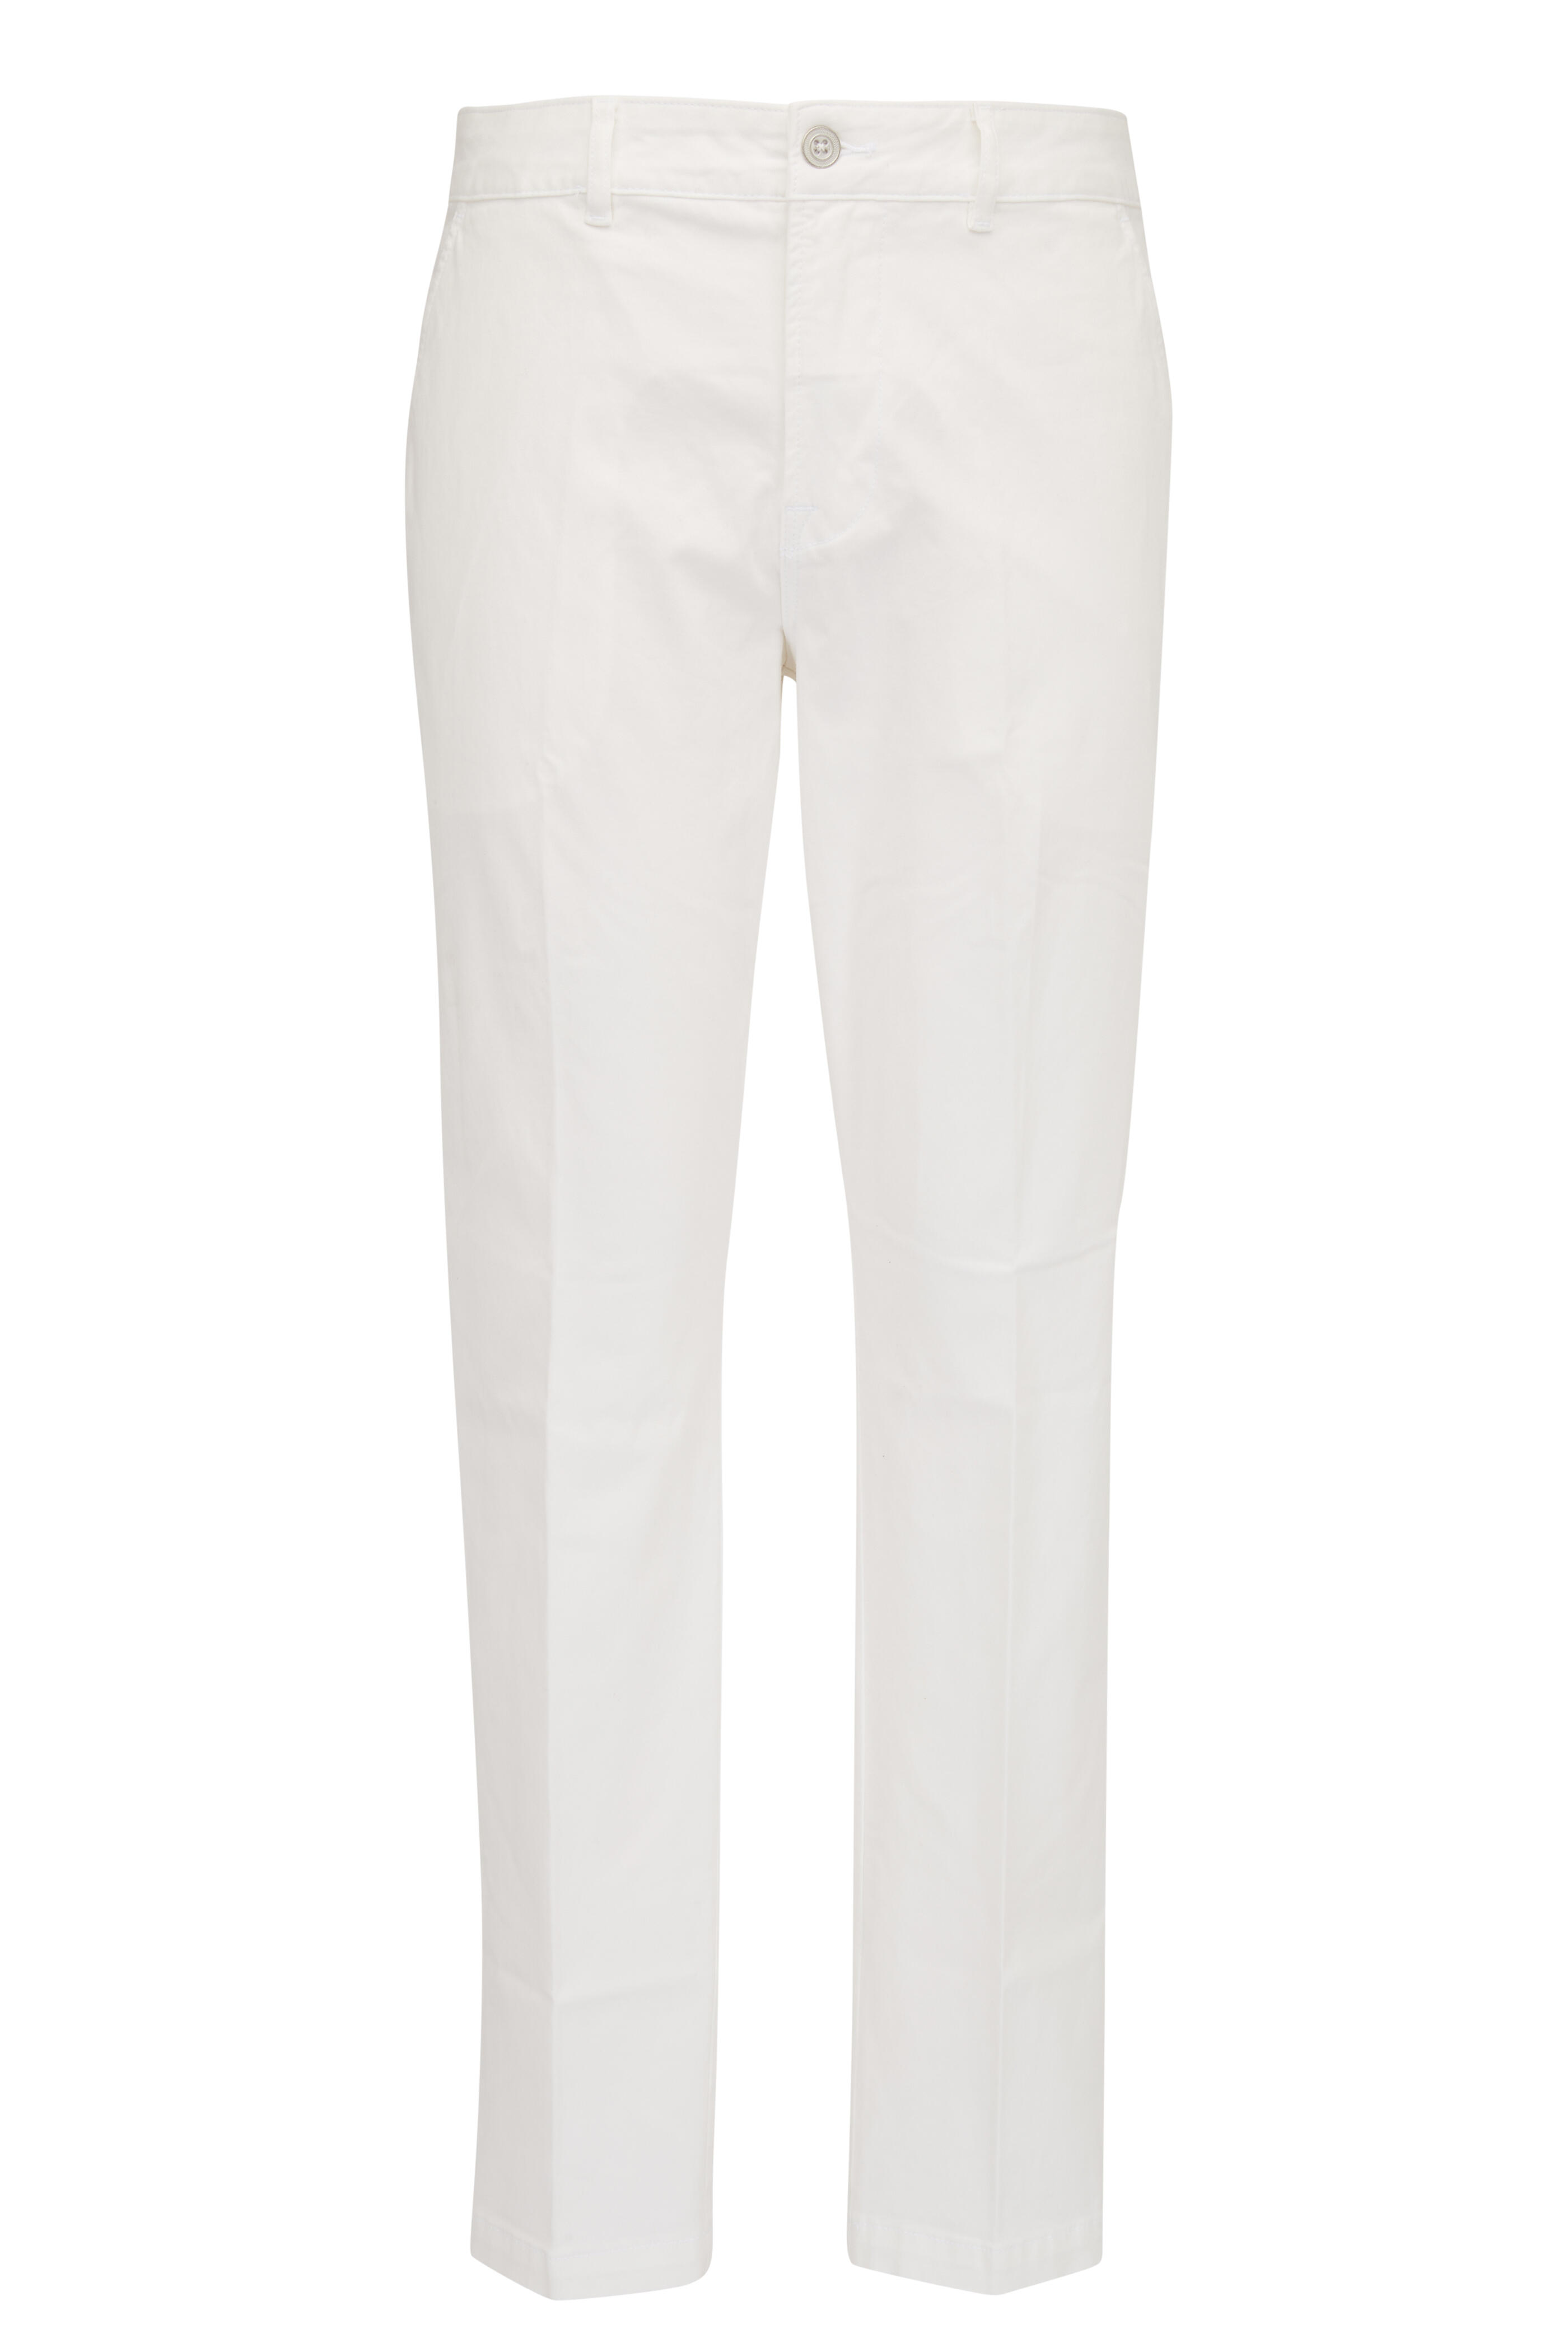 Hudson Clothing - Classic White Slim Fit Pant | Mitchell Stores